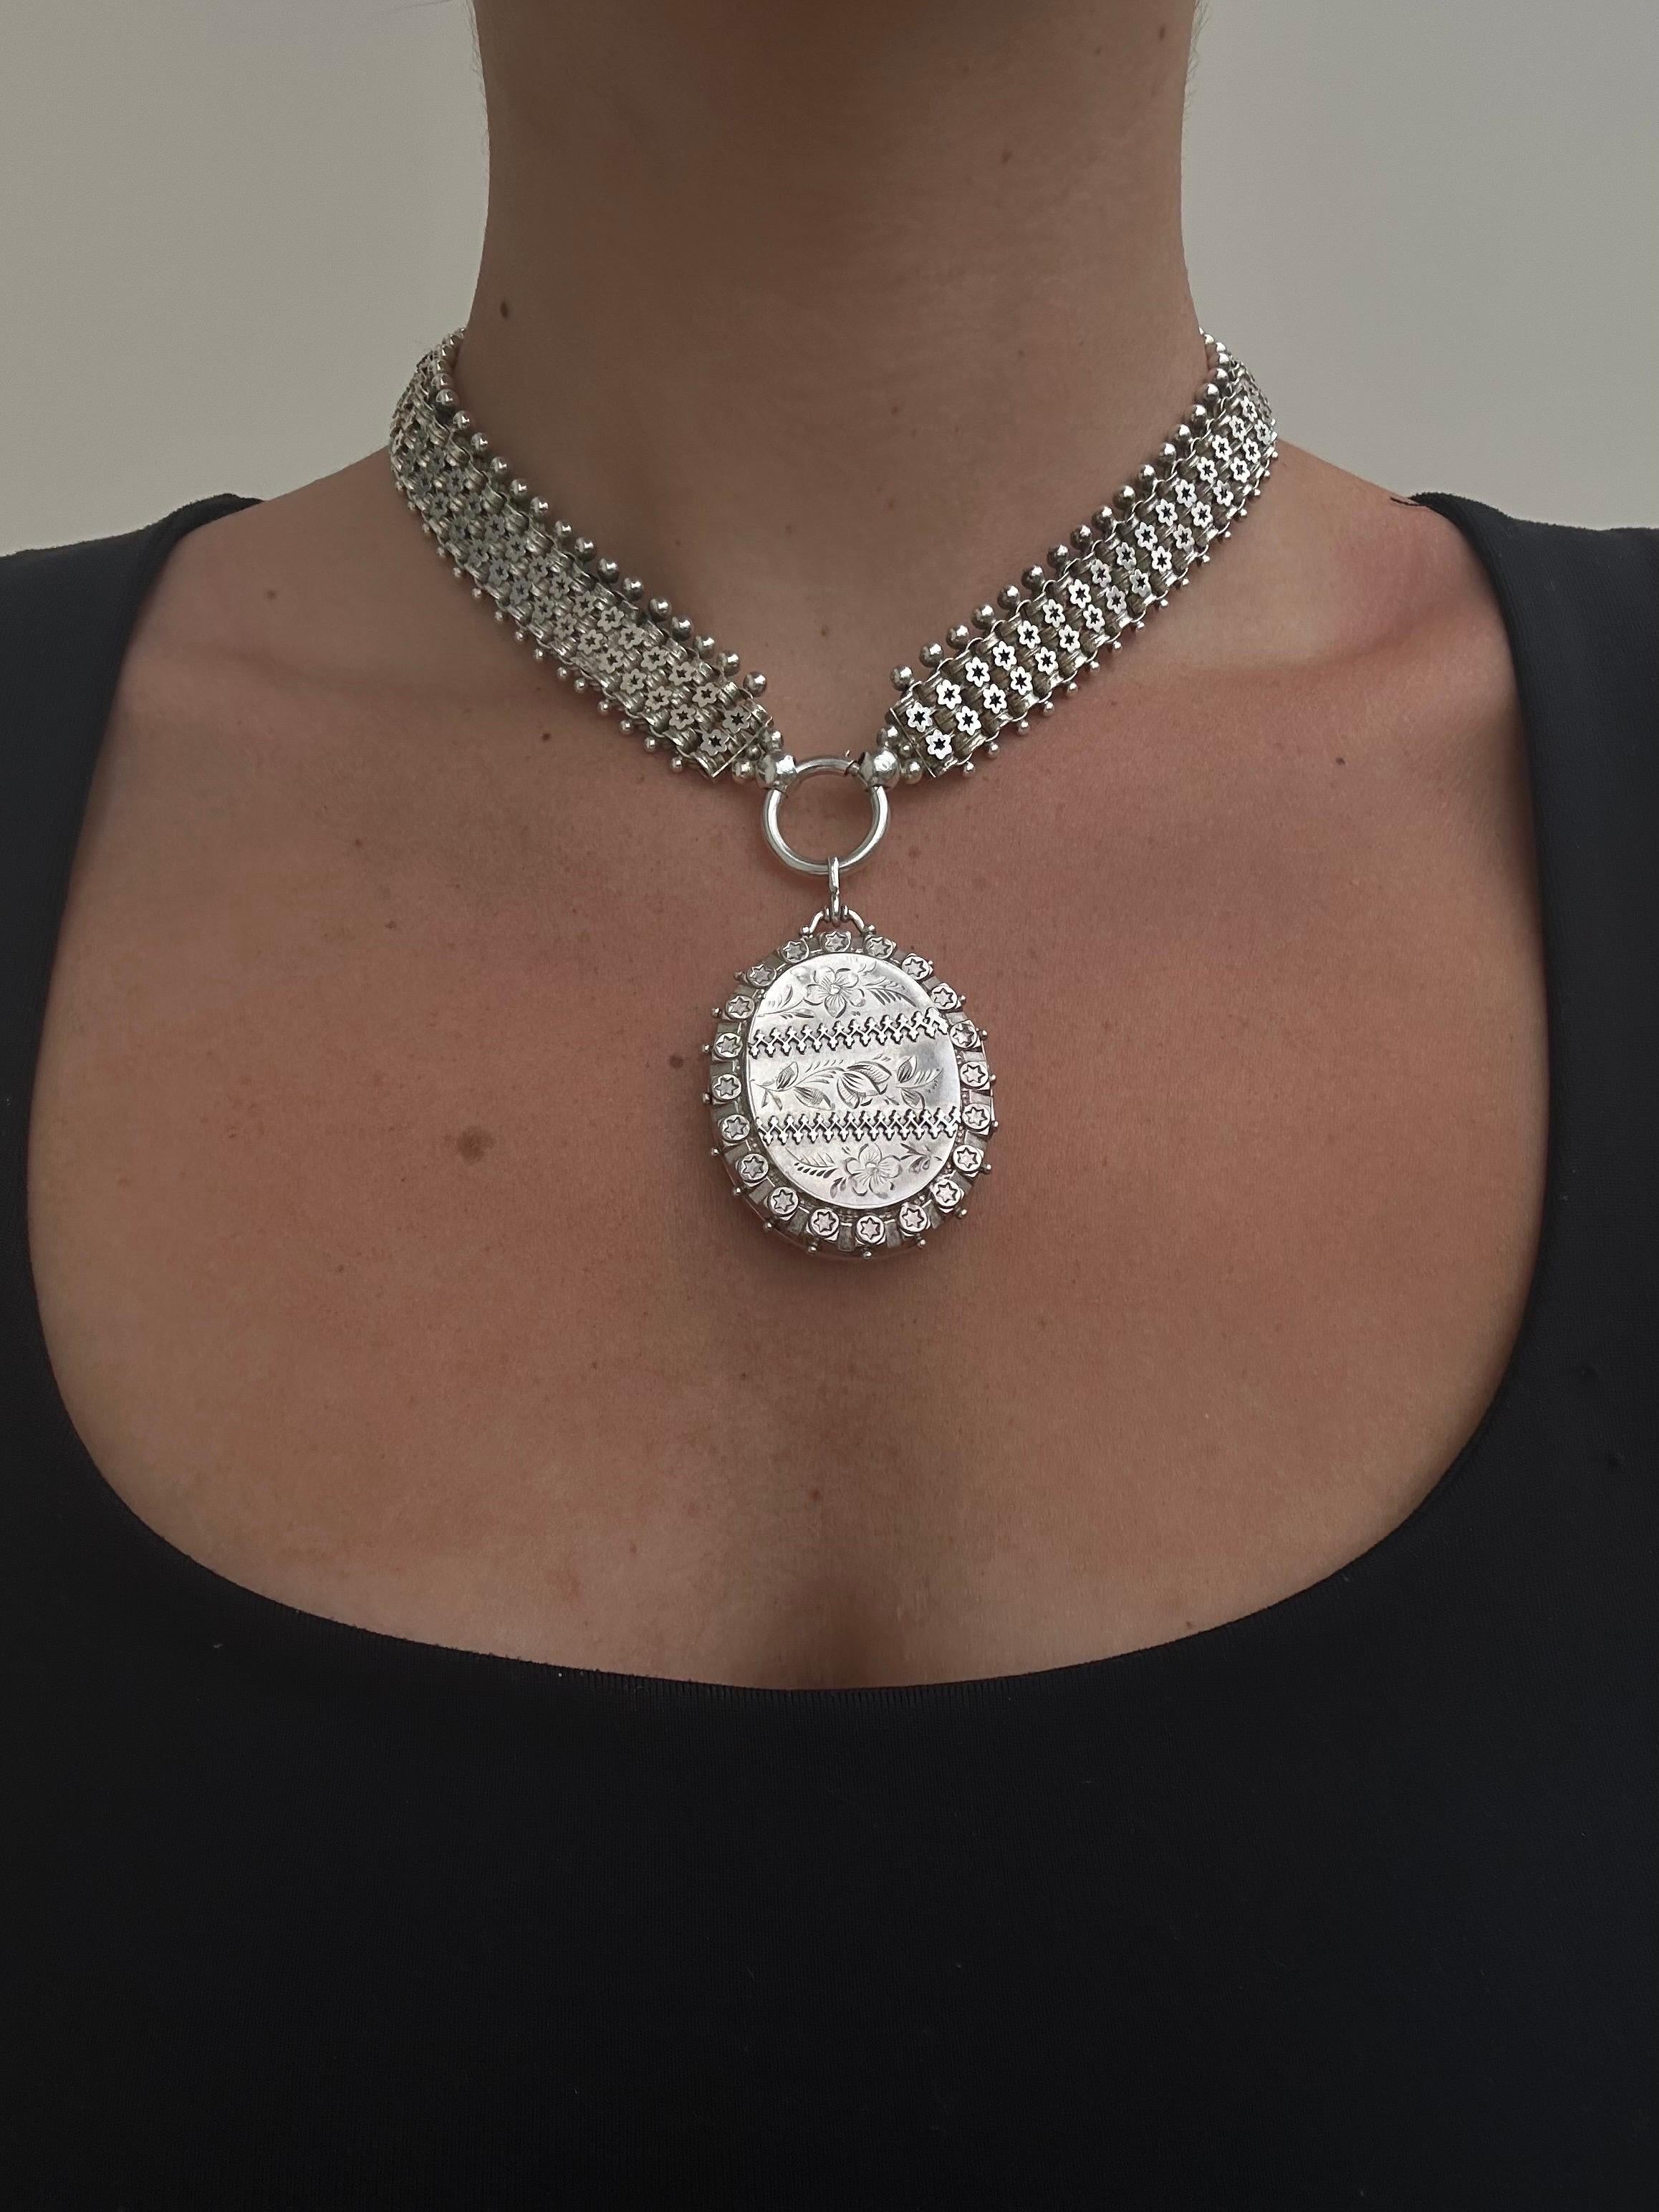 Outstanding Victorian circa 1887 Silver Collar with Locket Necklace In Good Condition For Sale In Chipping Campden, GB